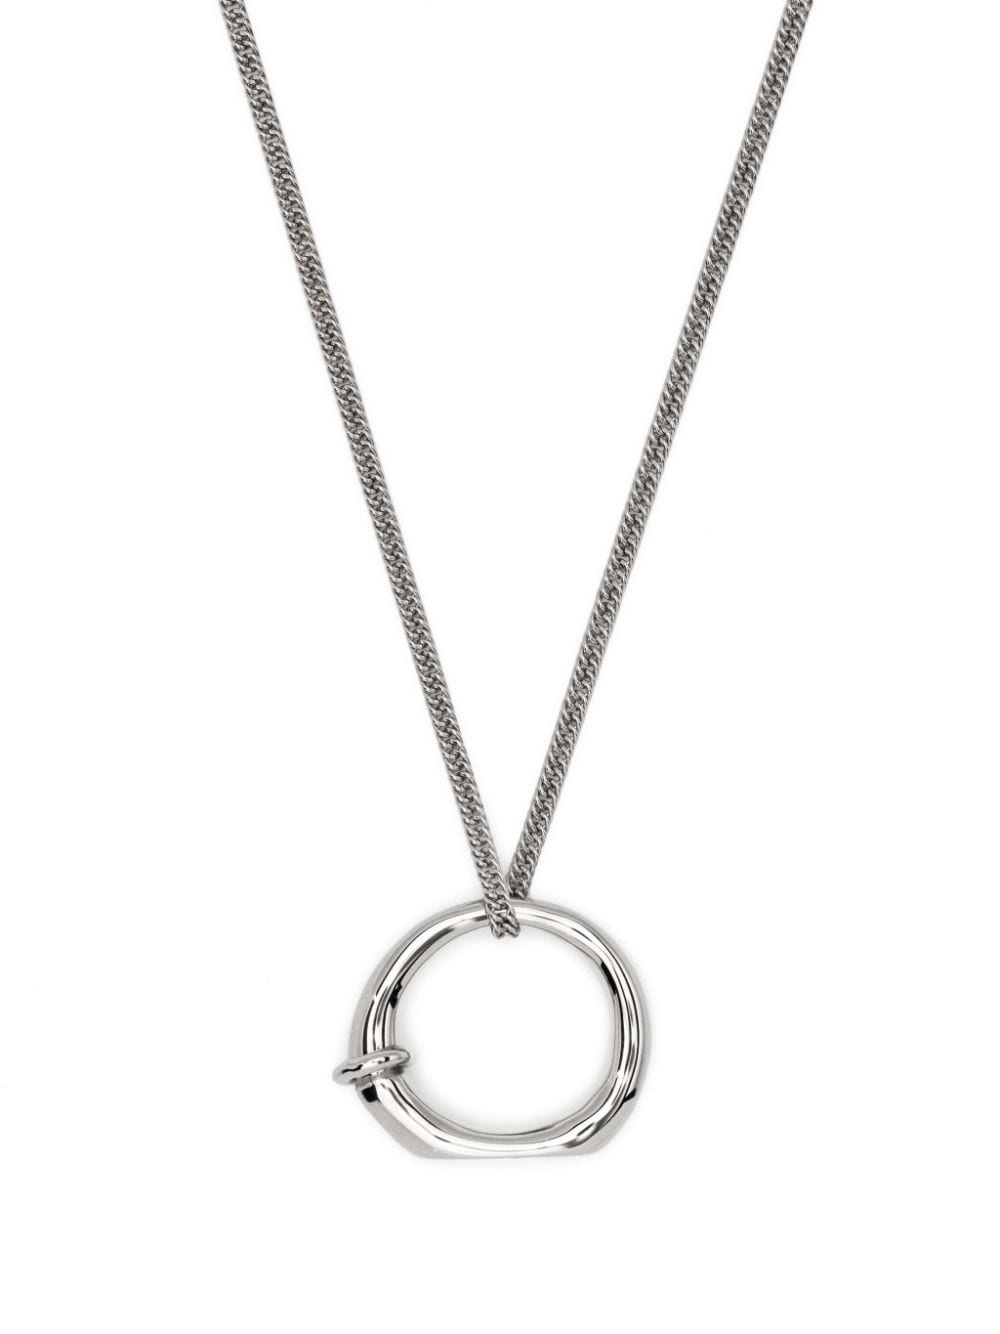 ring pendant necklace - 1